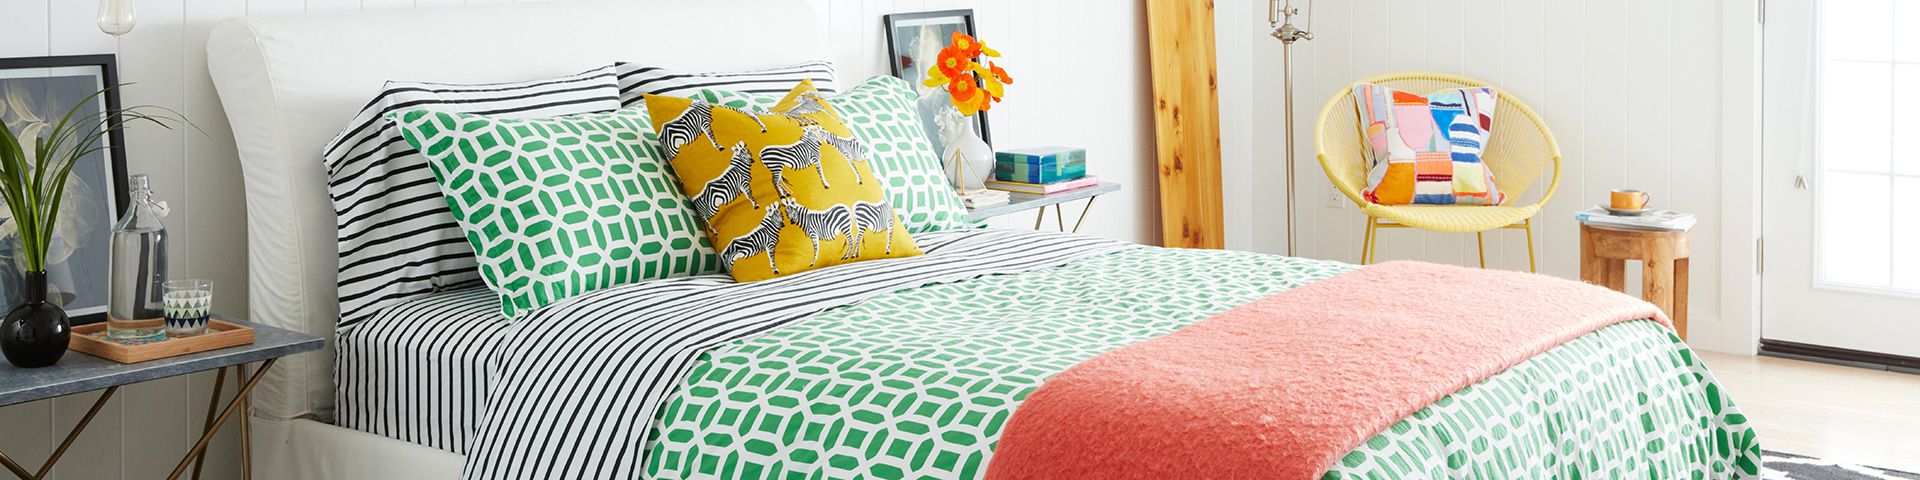 green and stripes bedroom